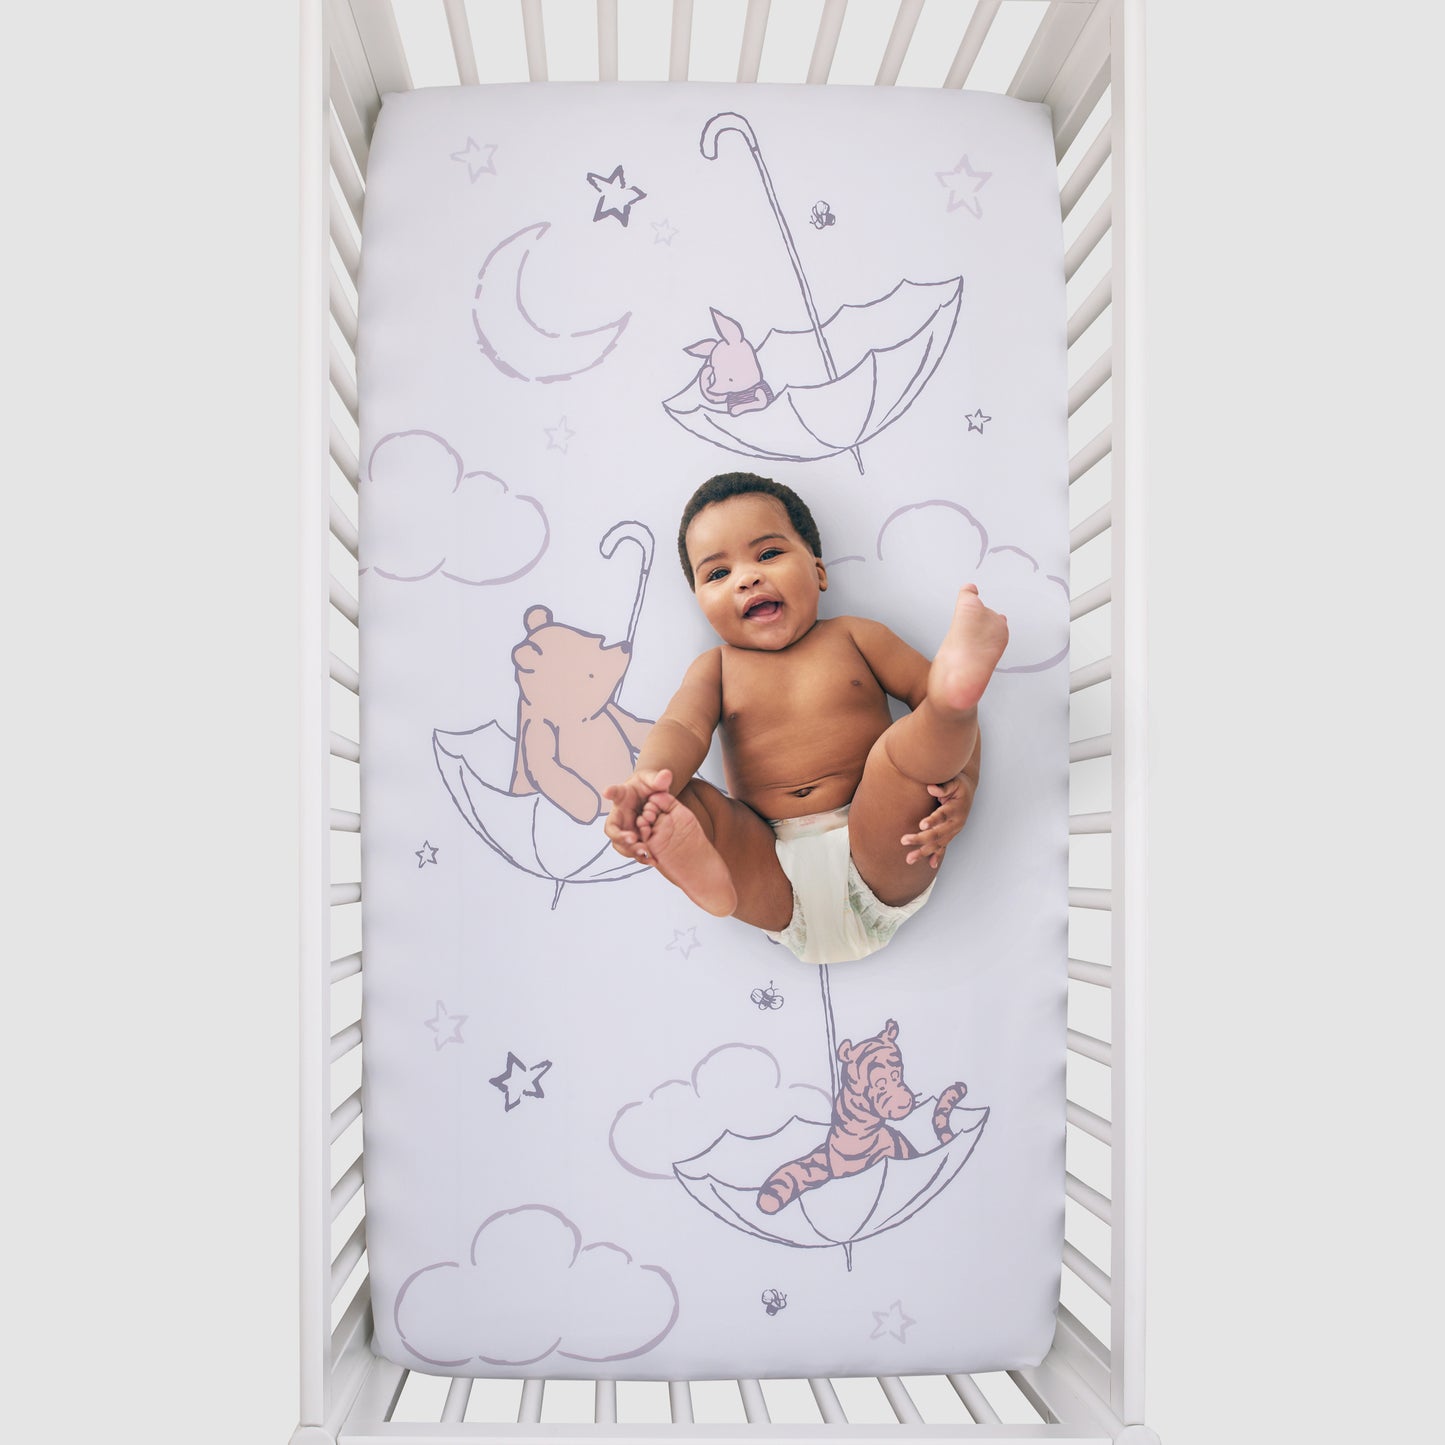 Disney Winnie the Pooh - Classic Pooh - Ivory, Tan and White Photo Op Fitted Crib Sheet